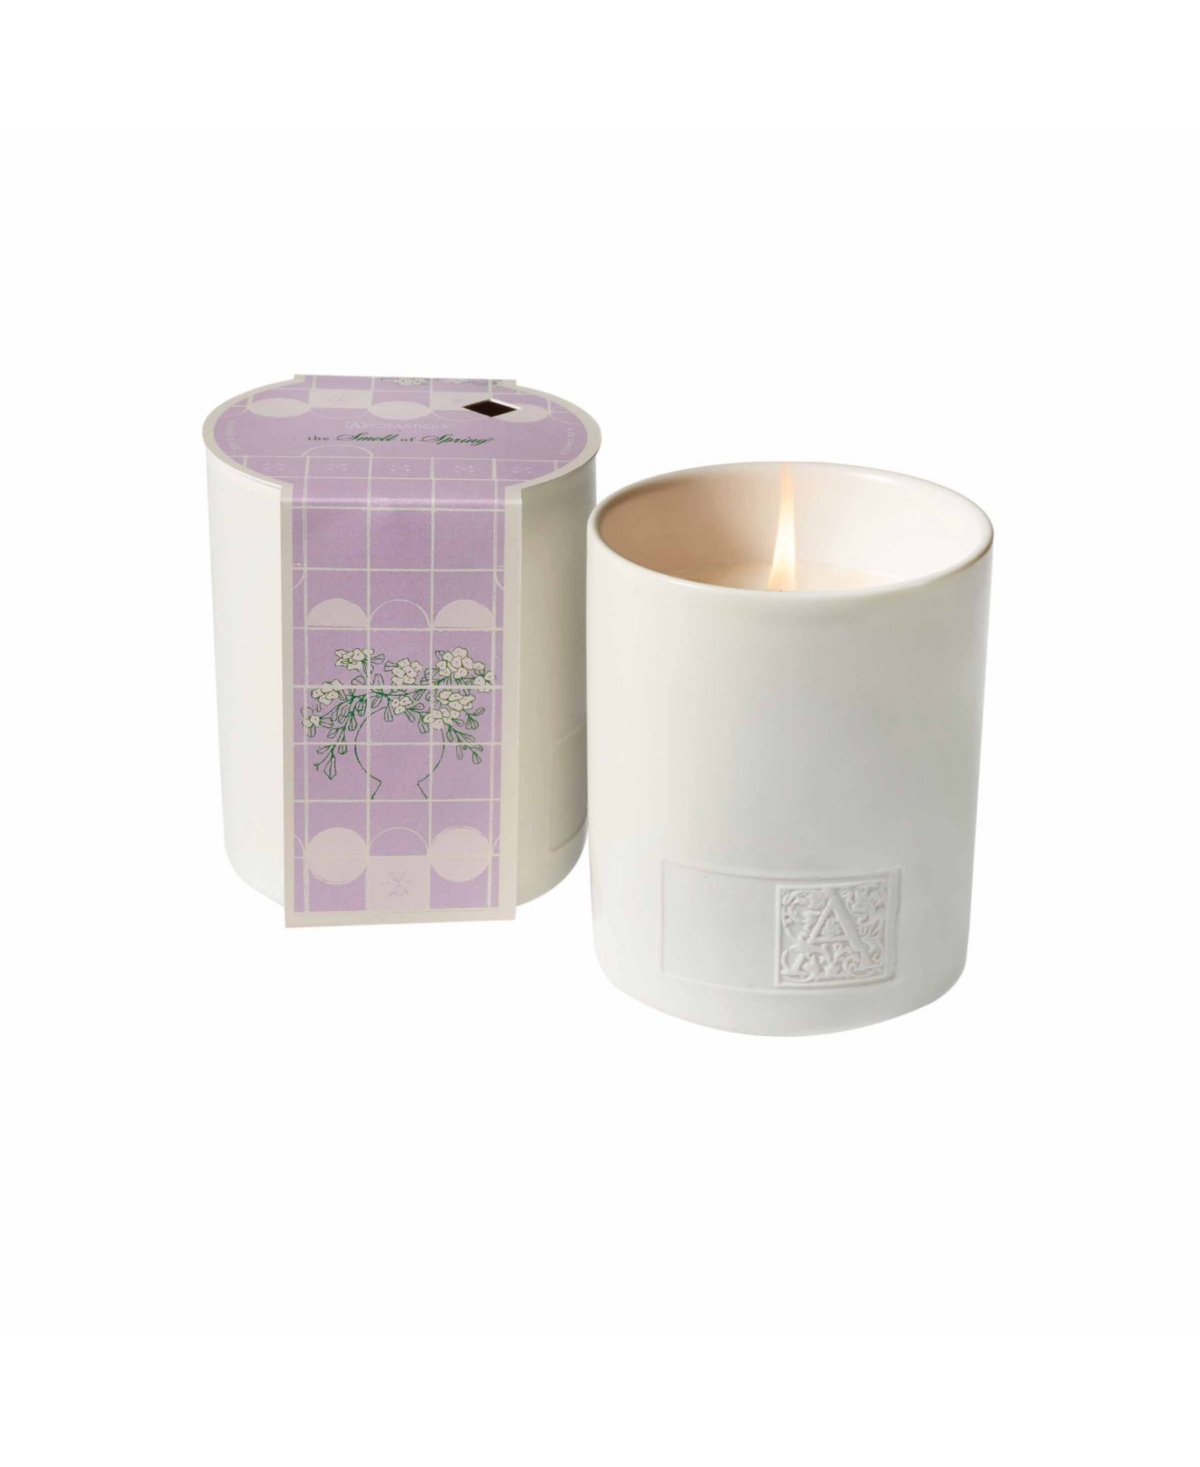 13679974 The Smell of Spring Ceramic Candle sku 13679974